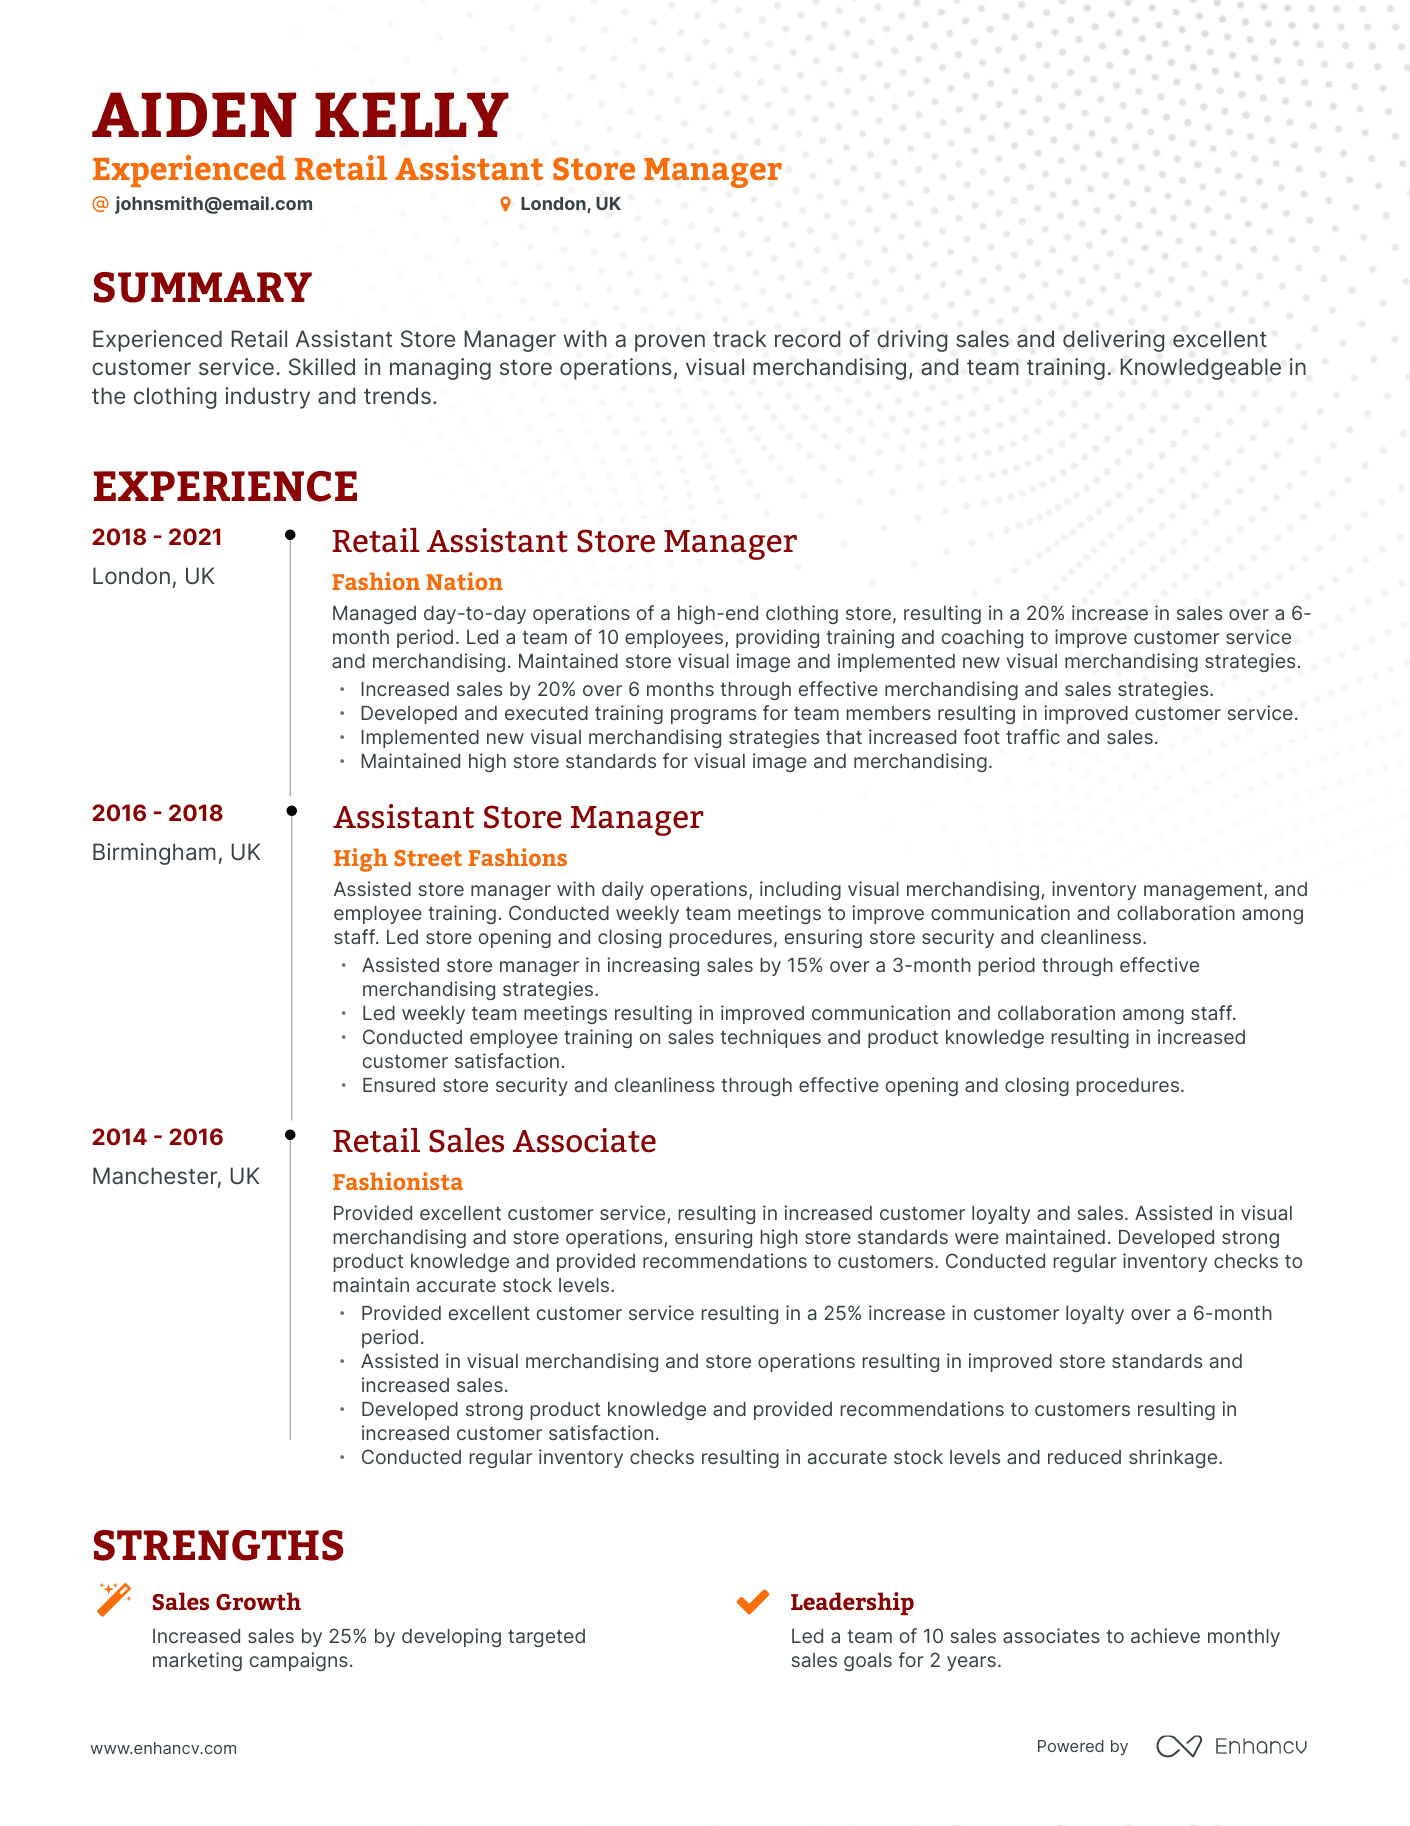 Timeline Retail Assistant Store Manager Resume Template